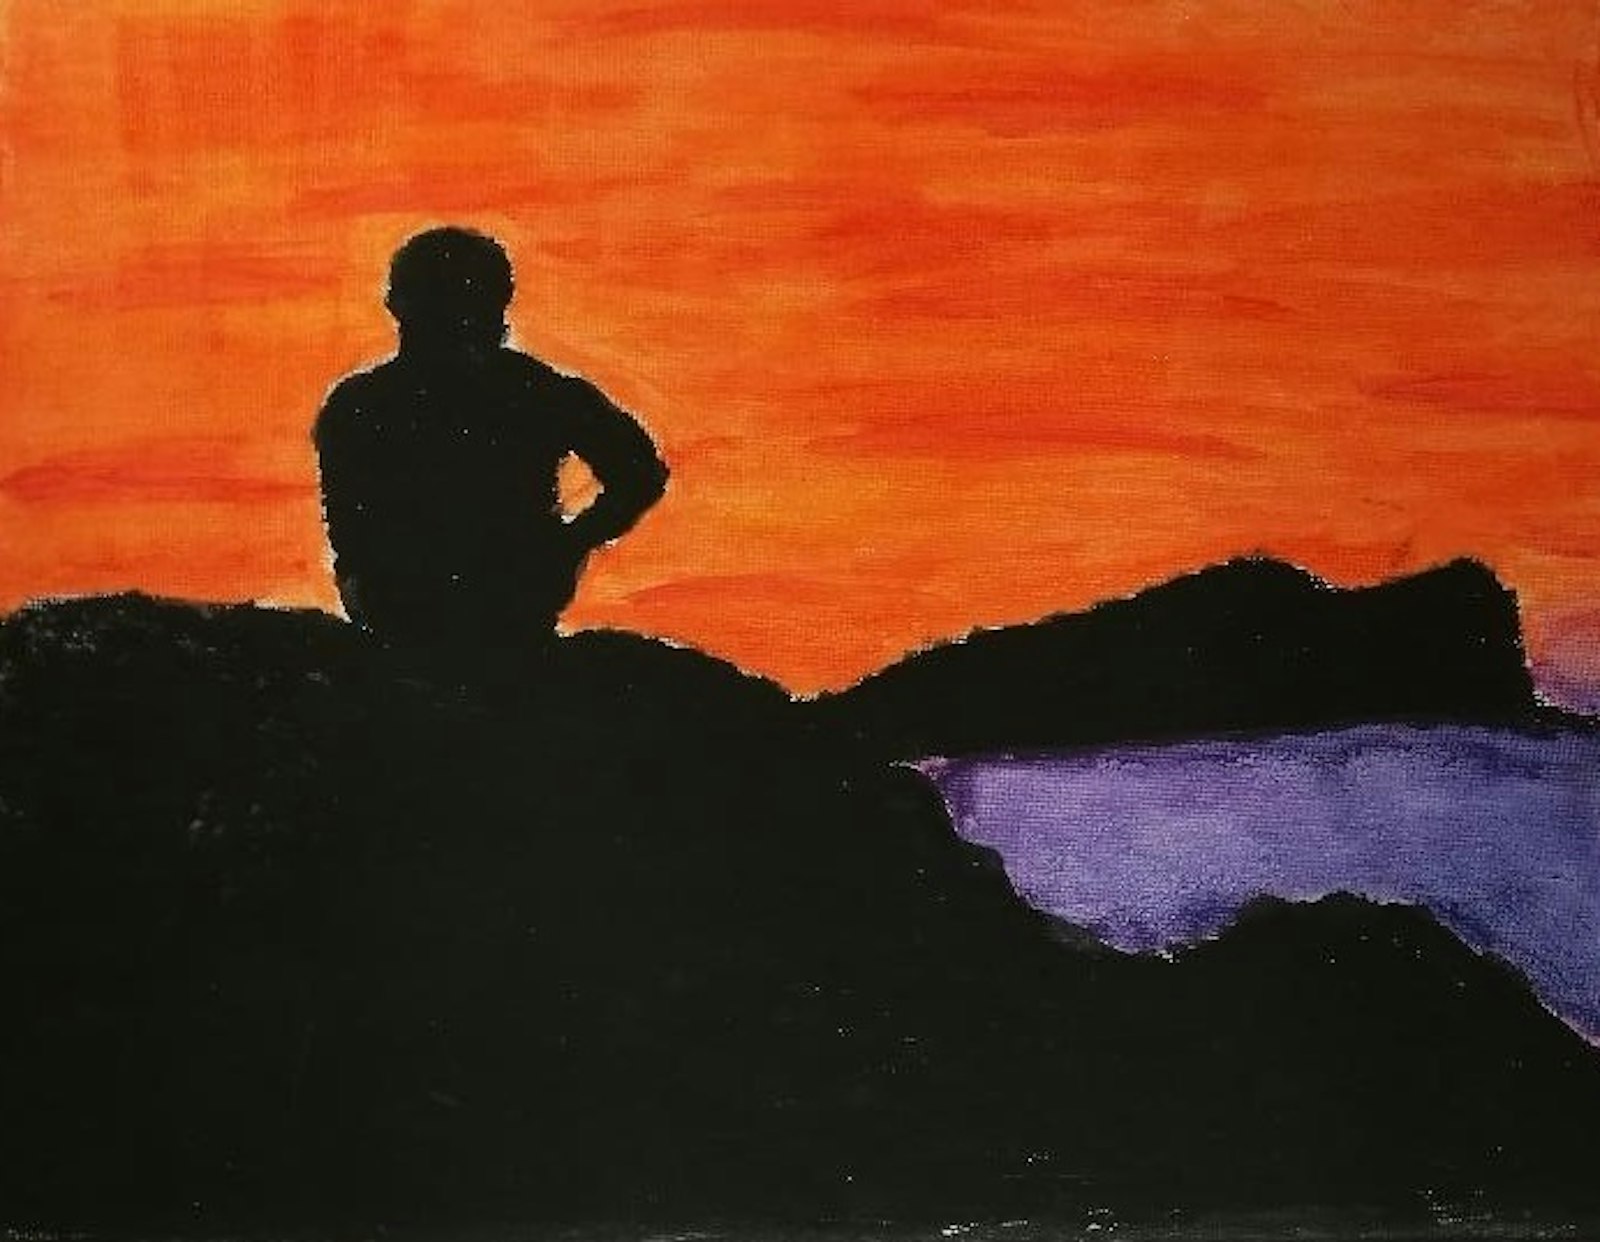 A painting of a silhouetted sunset created by a refugee named Merhawi, of Eritrea, will be part of the exhibit. "Life is a journey. I don’t know where I am going or where I will end up, but I know I am on my way to complete it," Merwahi wrote of the piece.